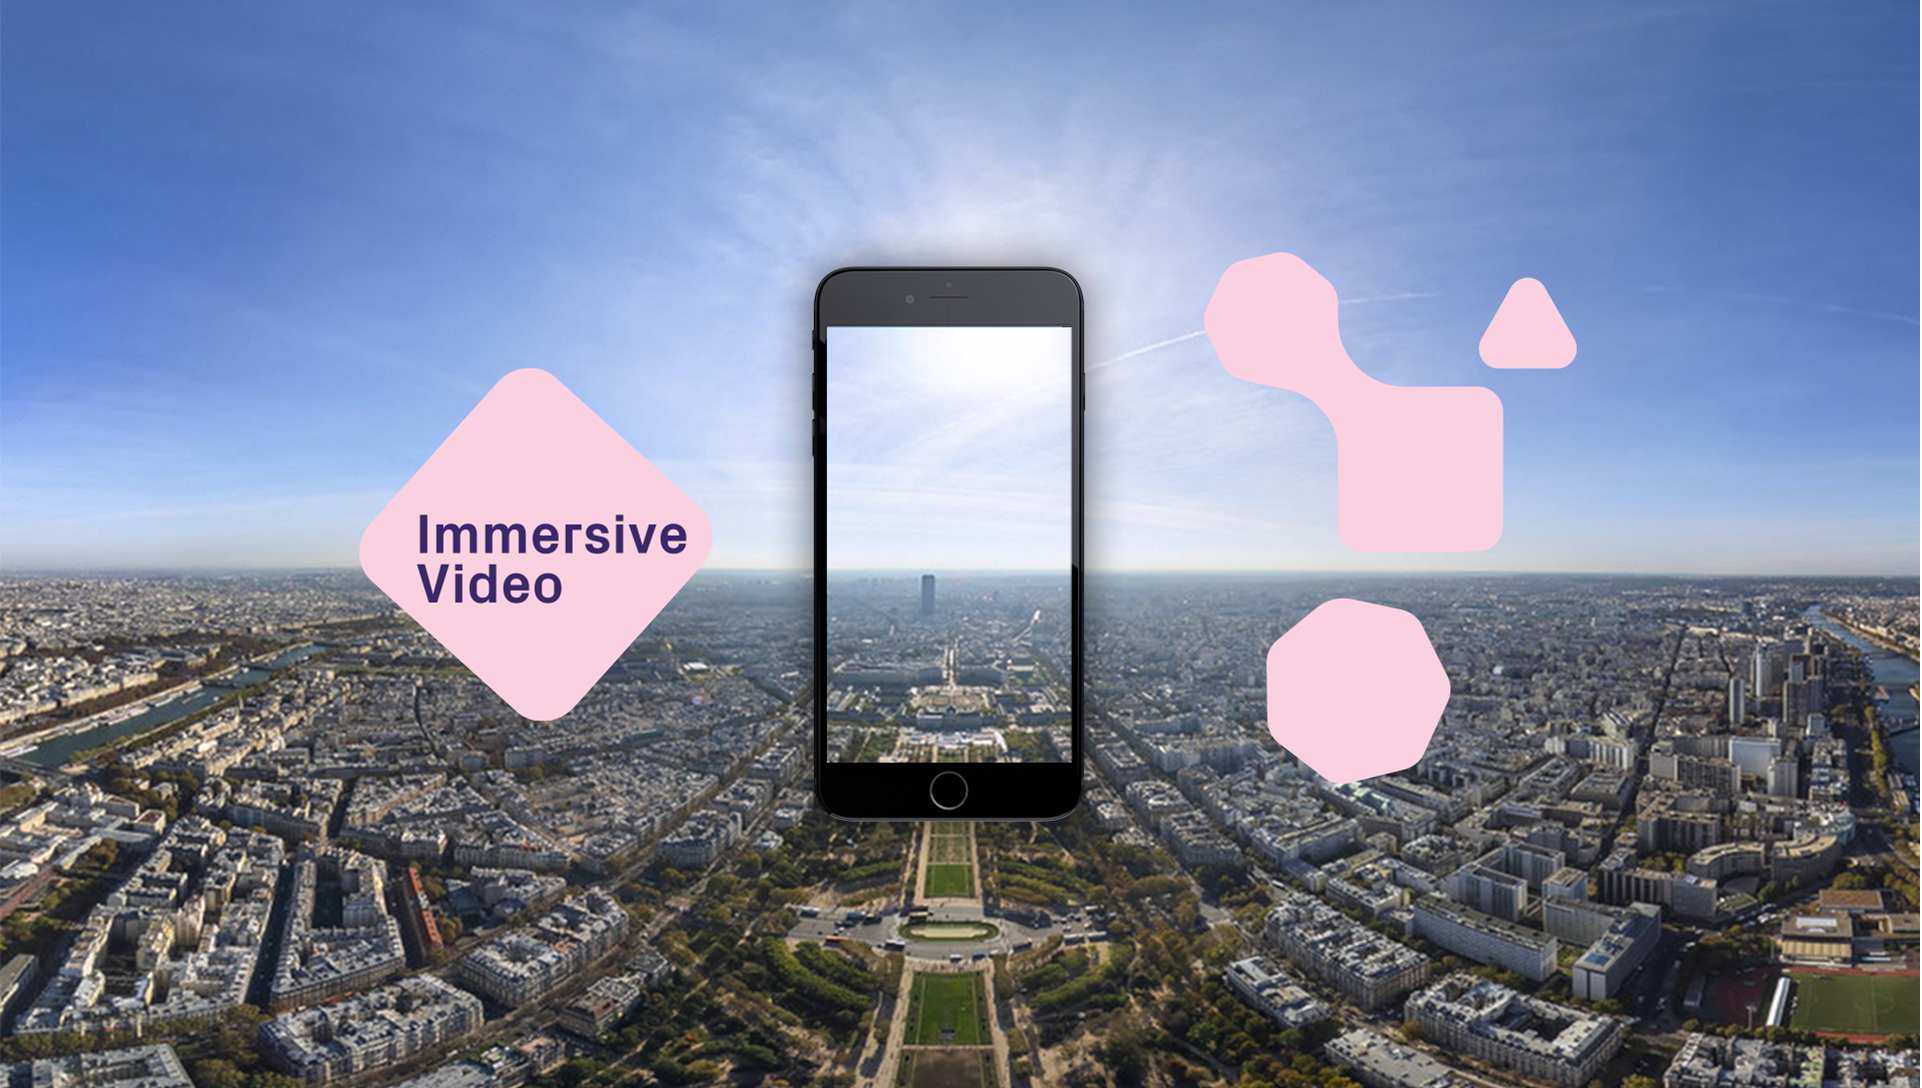 Immersive Video: A Compelling Innovation for In-App Advertising